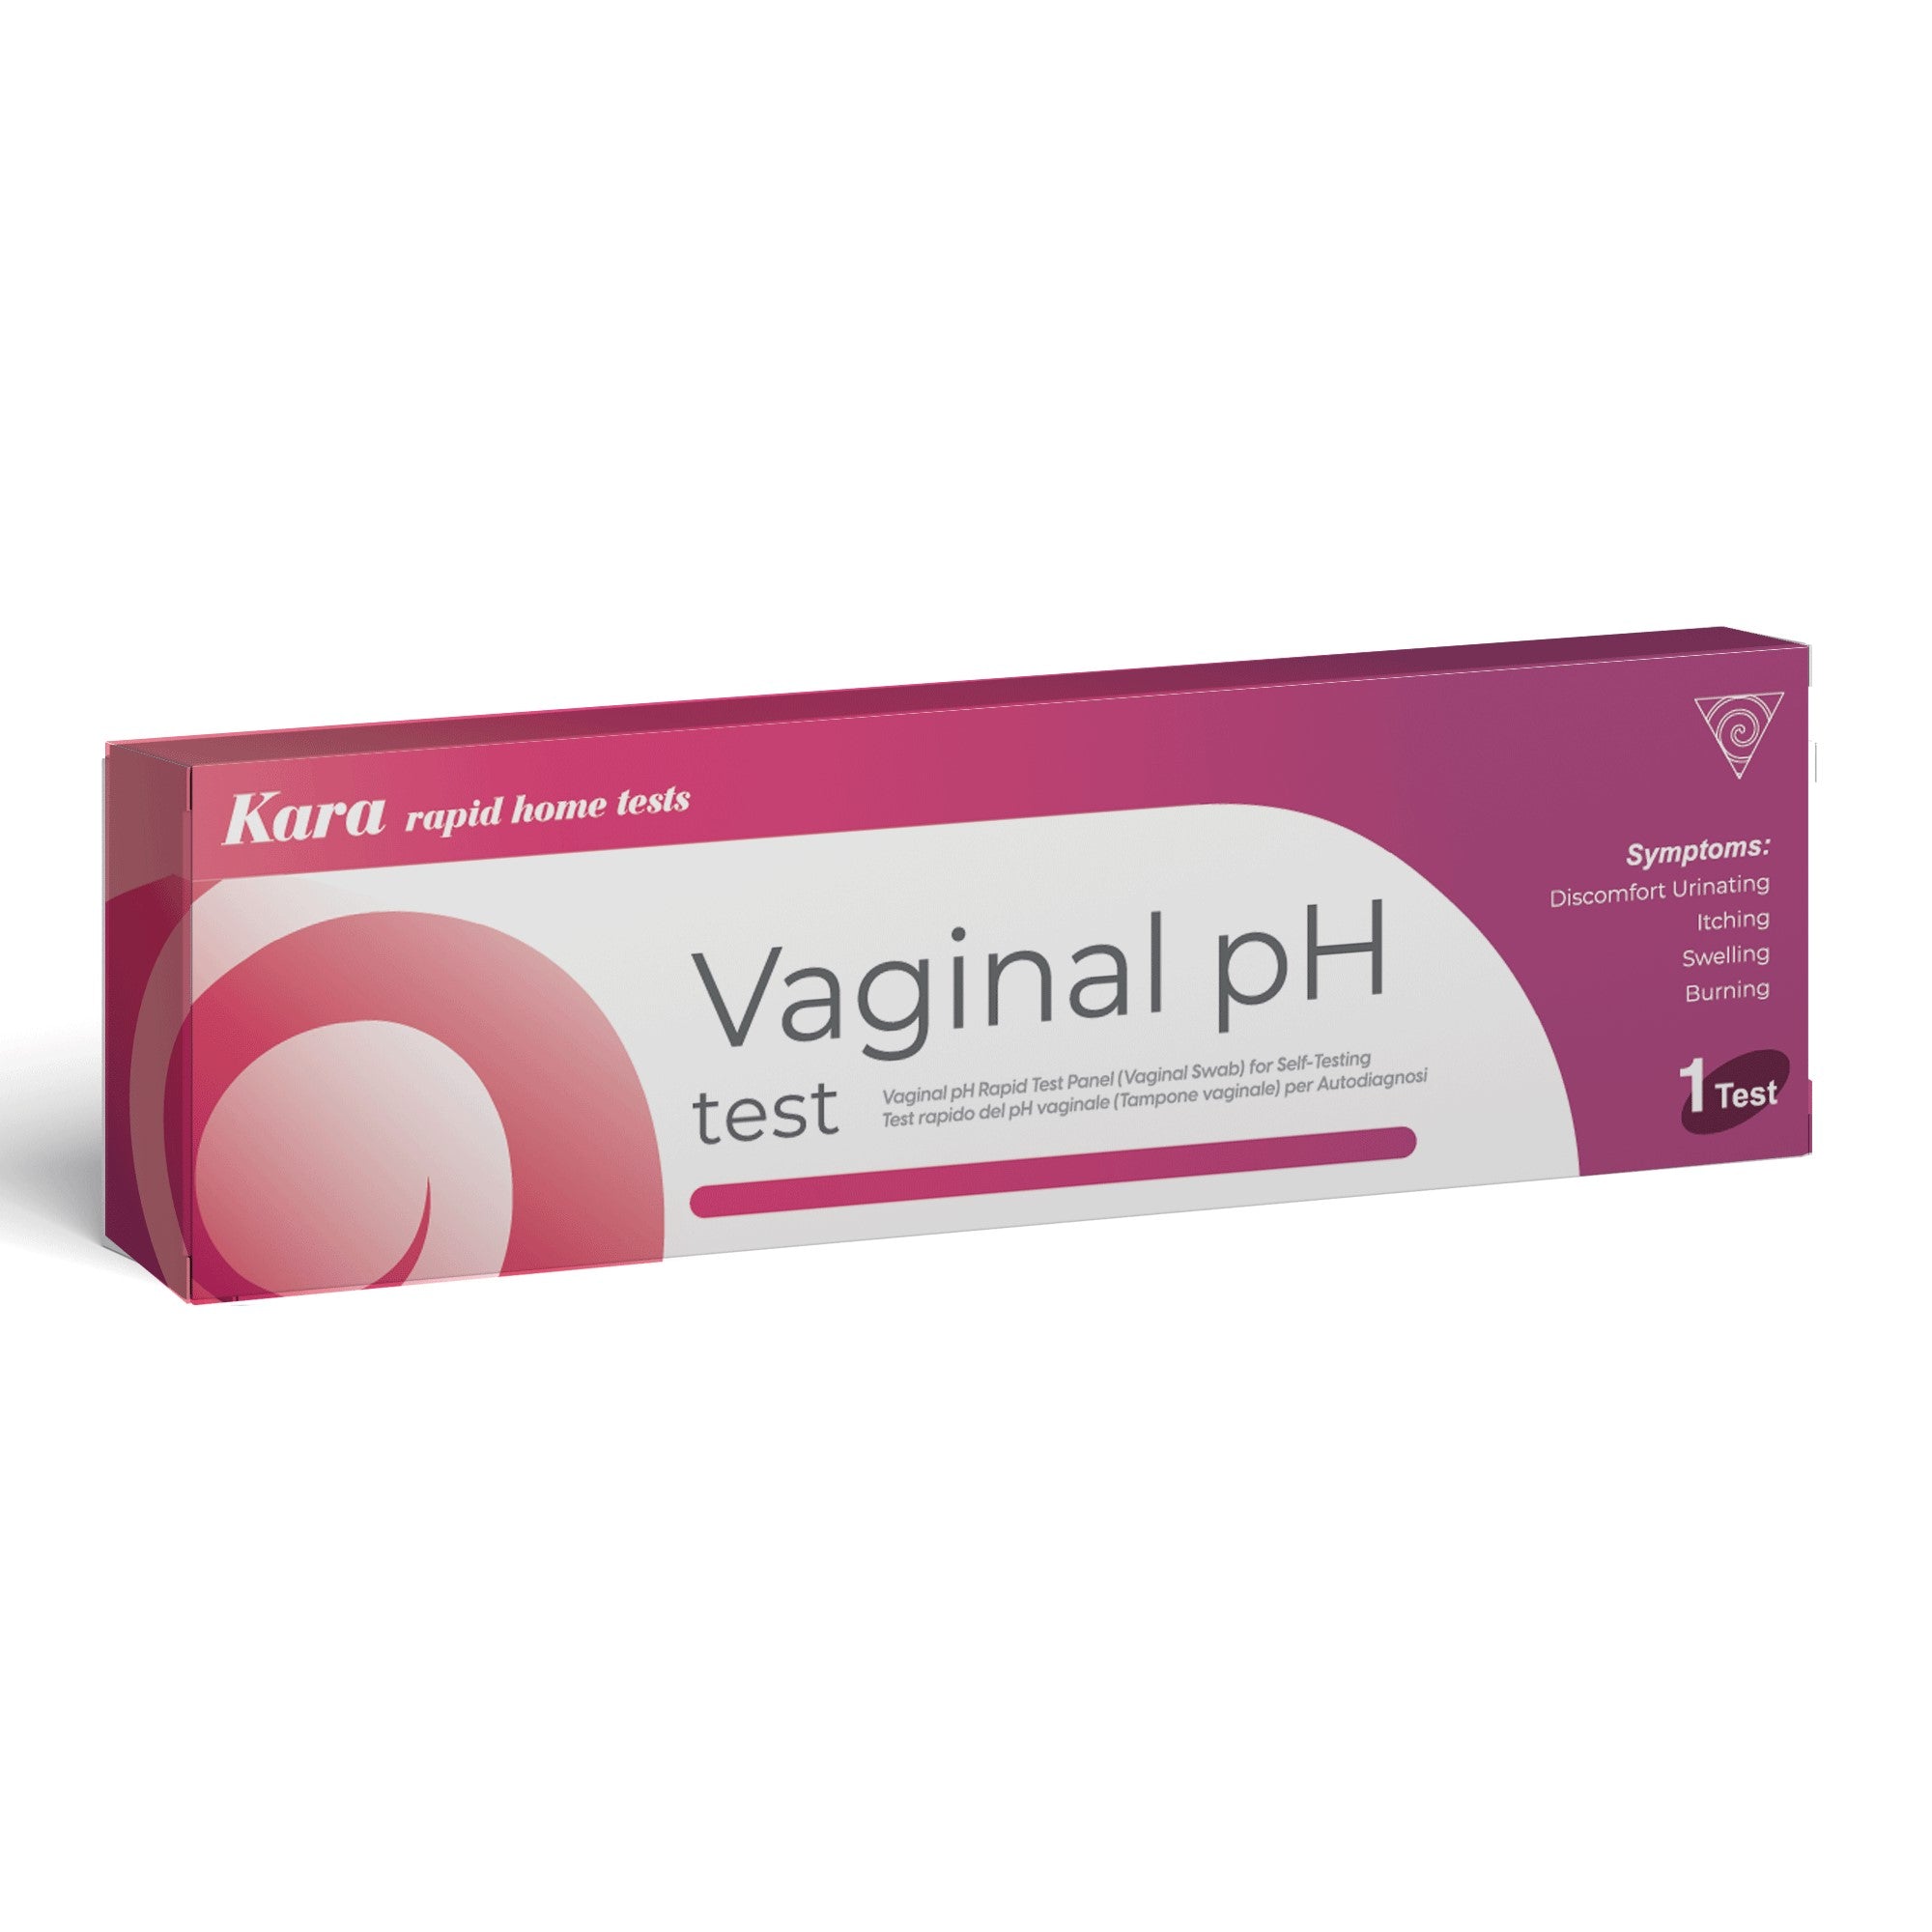 4 vaginal pH test options: Reviews and how to test at home